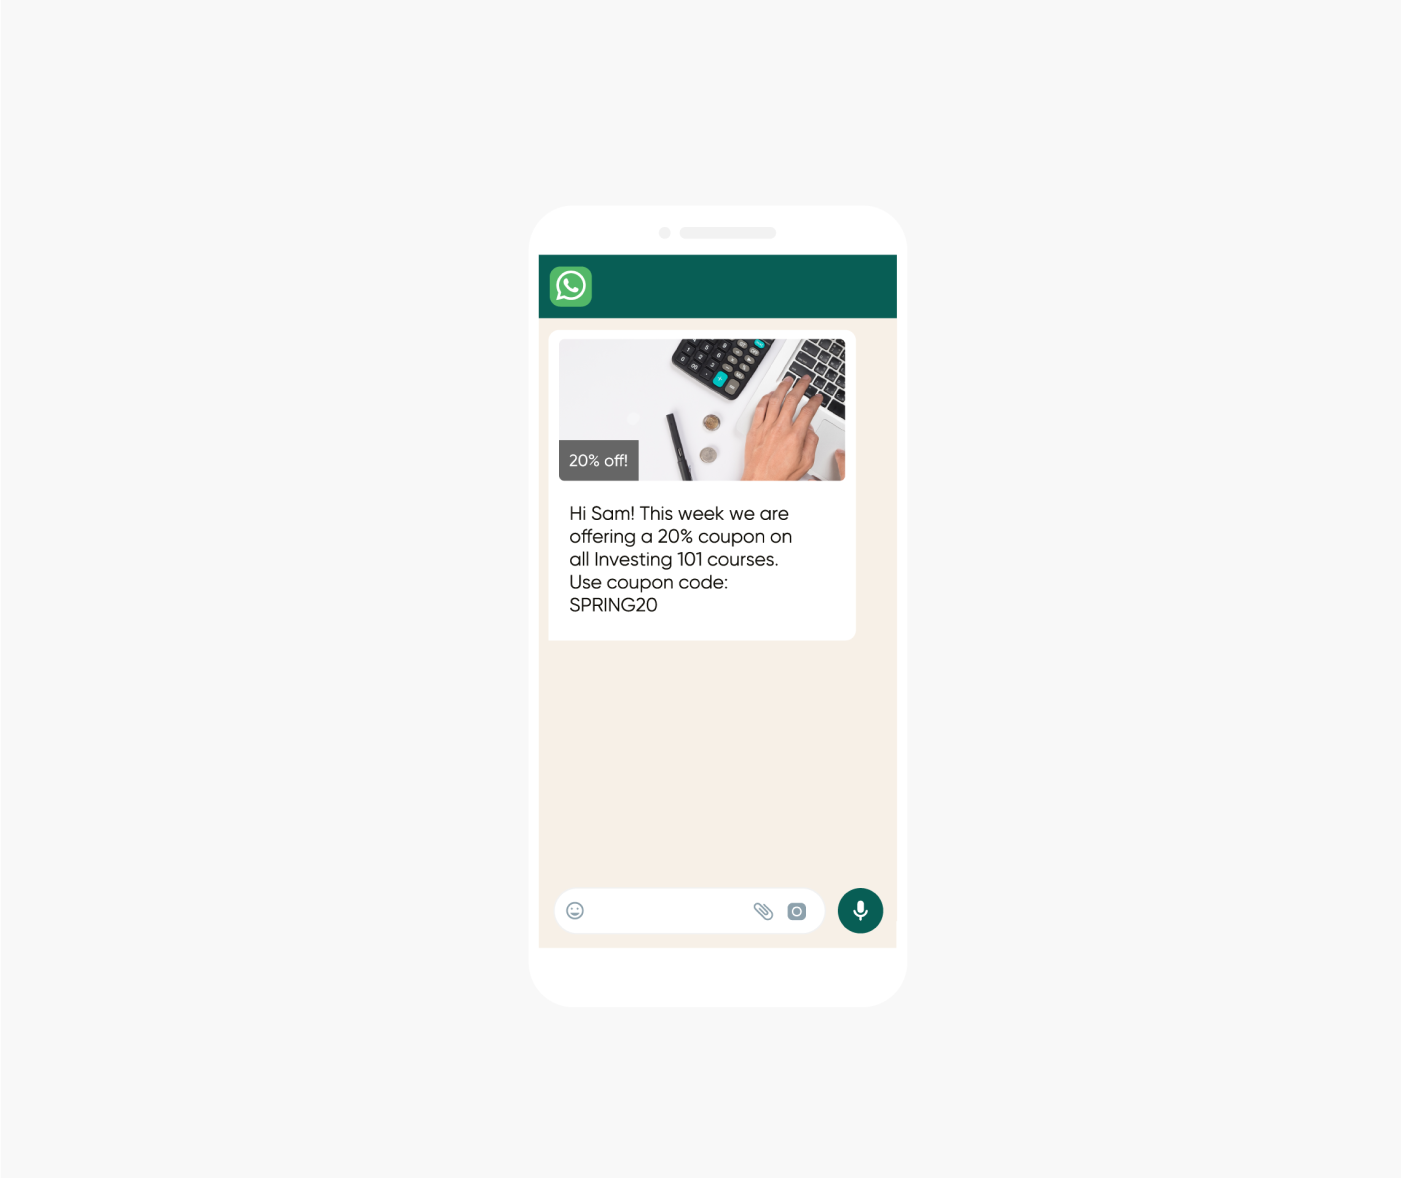 Example of a WhatsApp marketing template